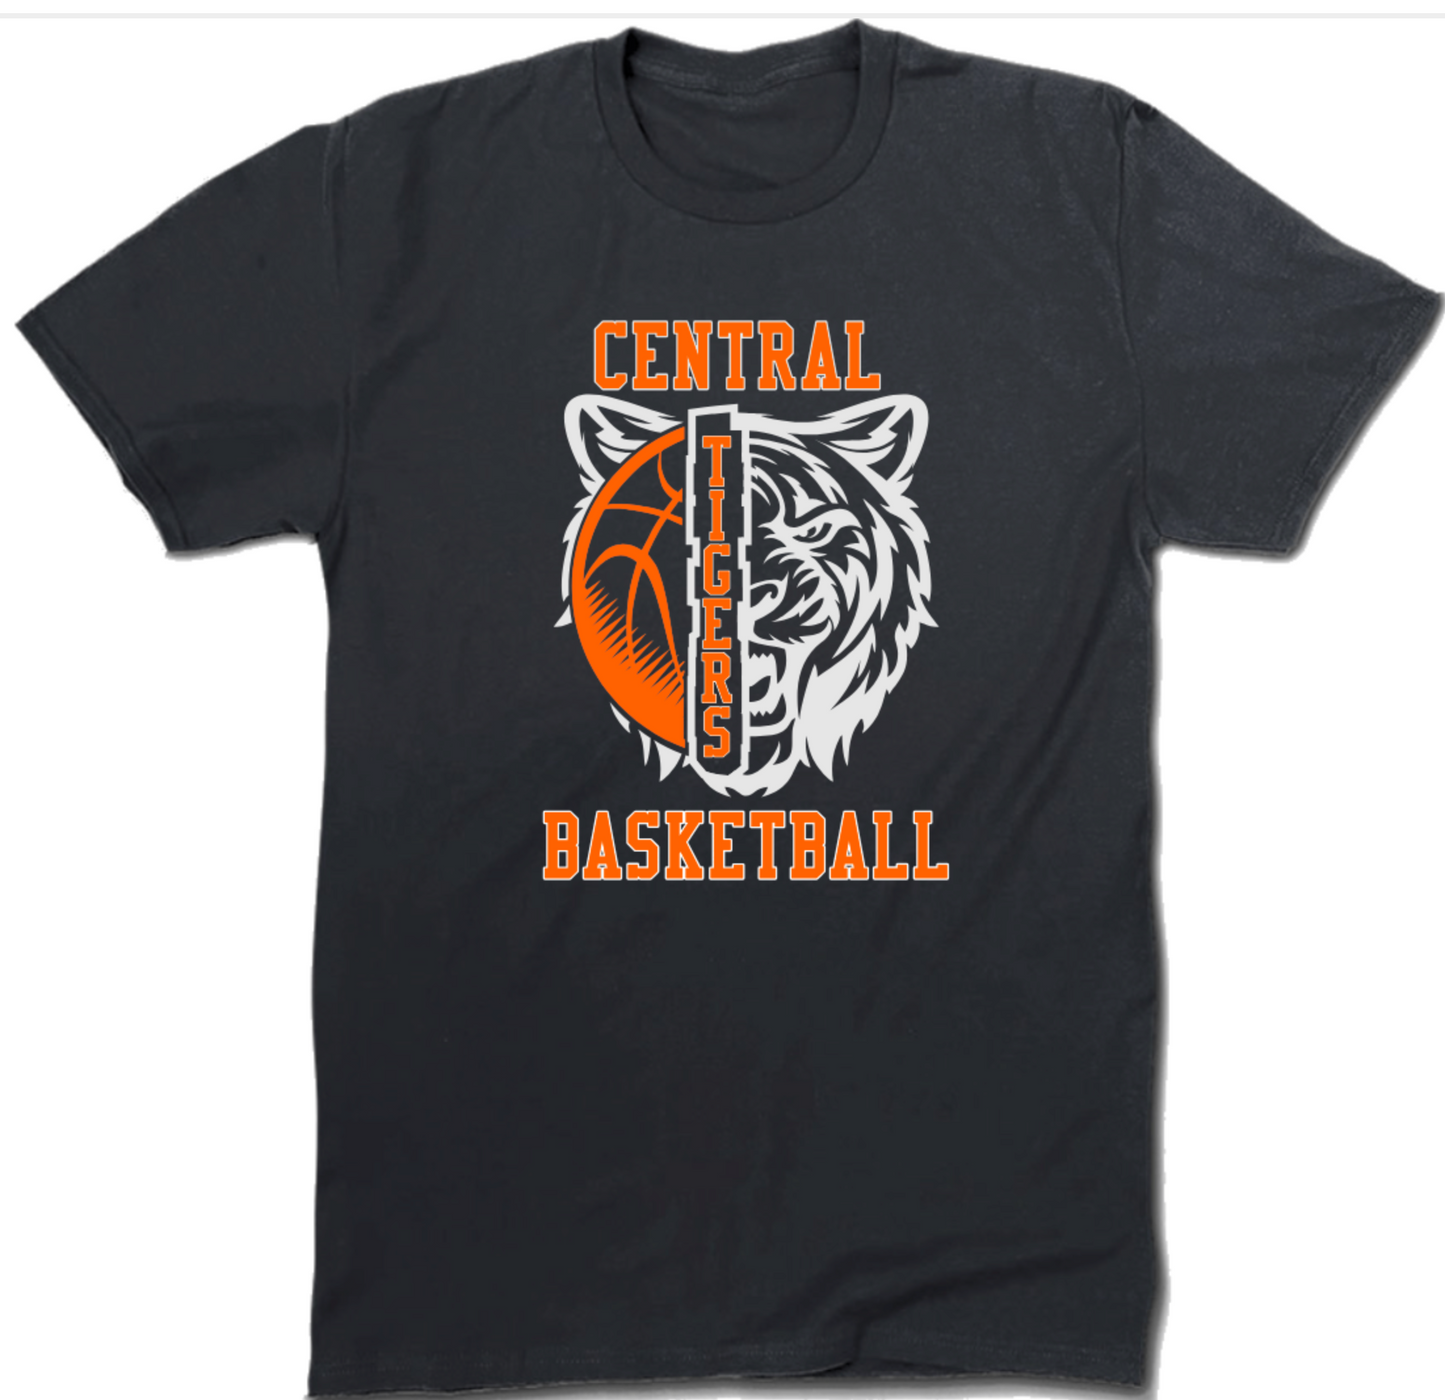 CENTRAL TIGERS BASKETBALL